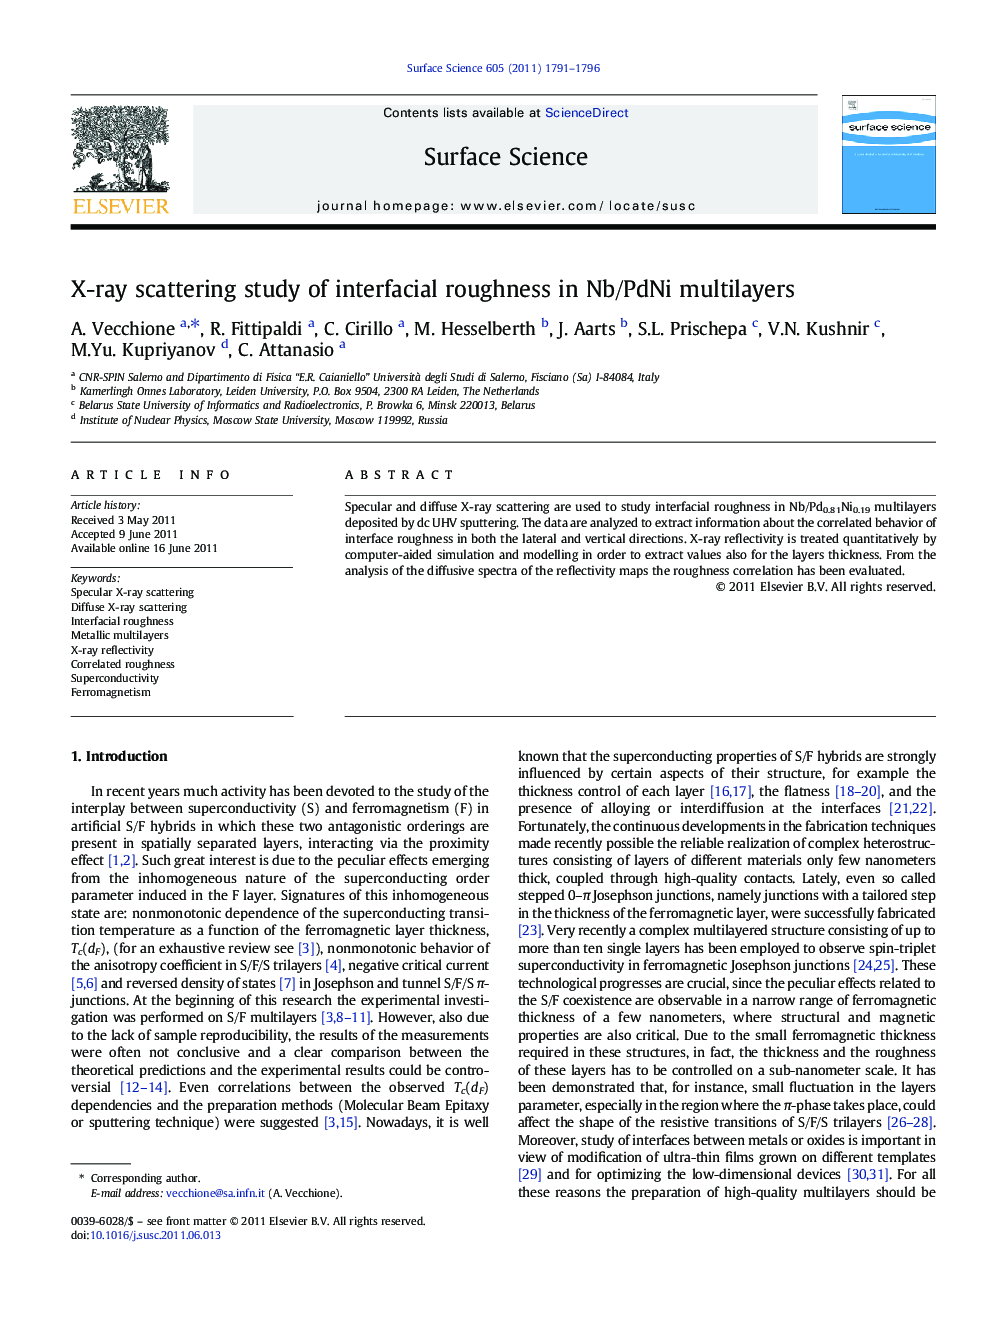 X-ray scattering study of interfacial roughness in Nb/PdNi multilayers